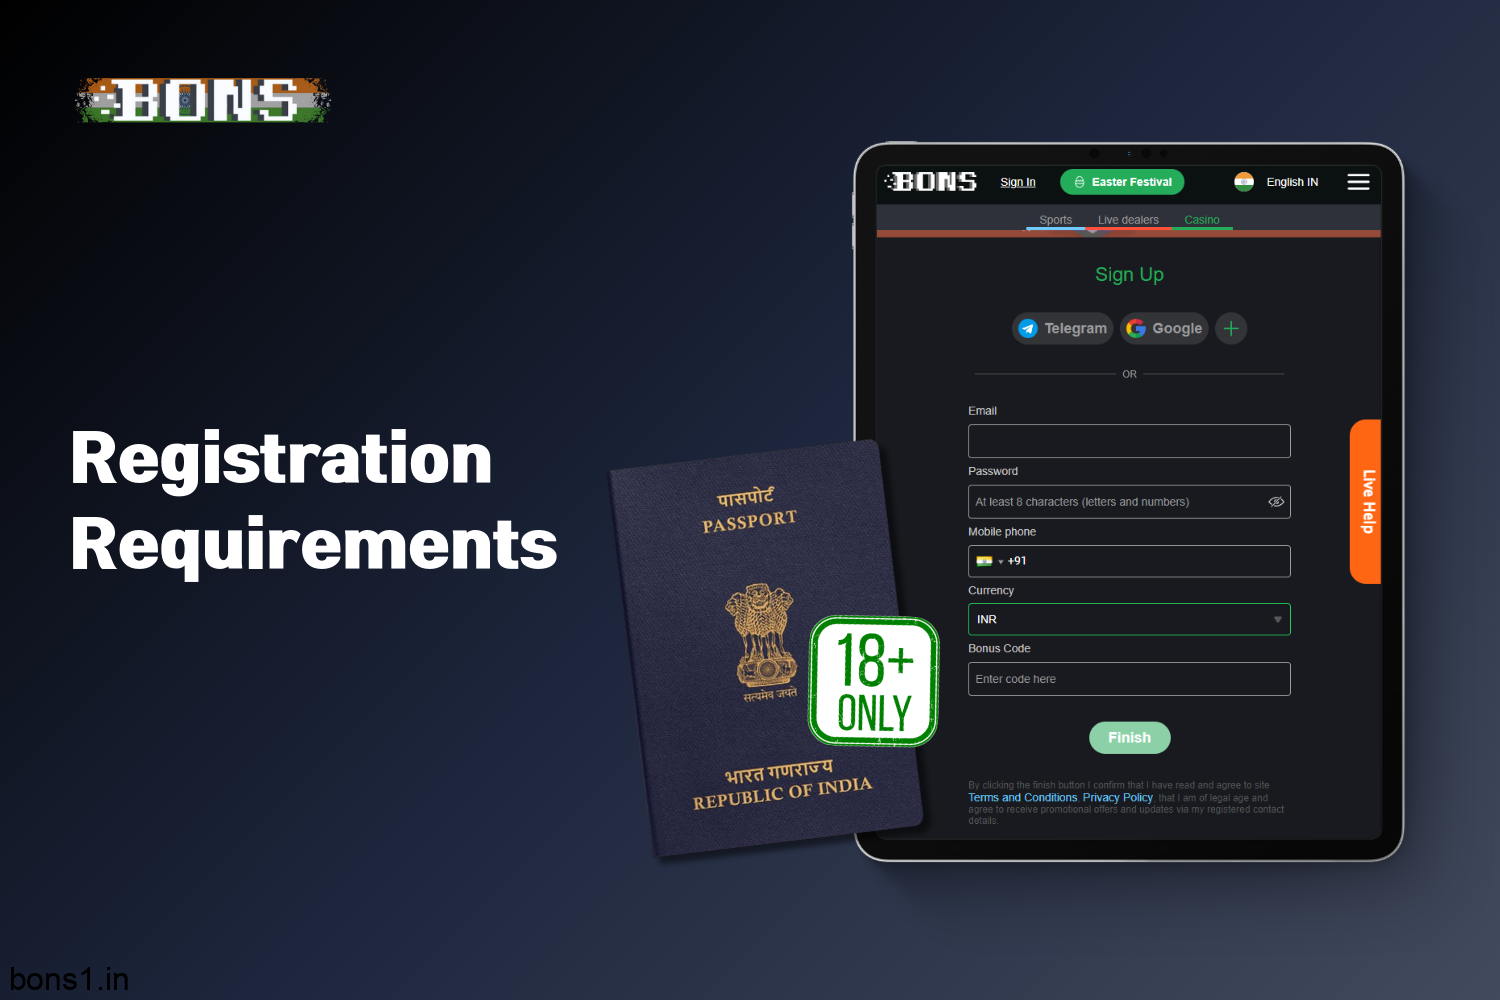 To register at Bons Casino, users from India must be over 18 years old and follow the site's rules